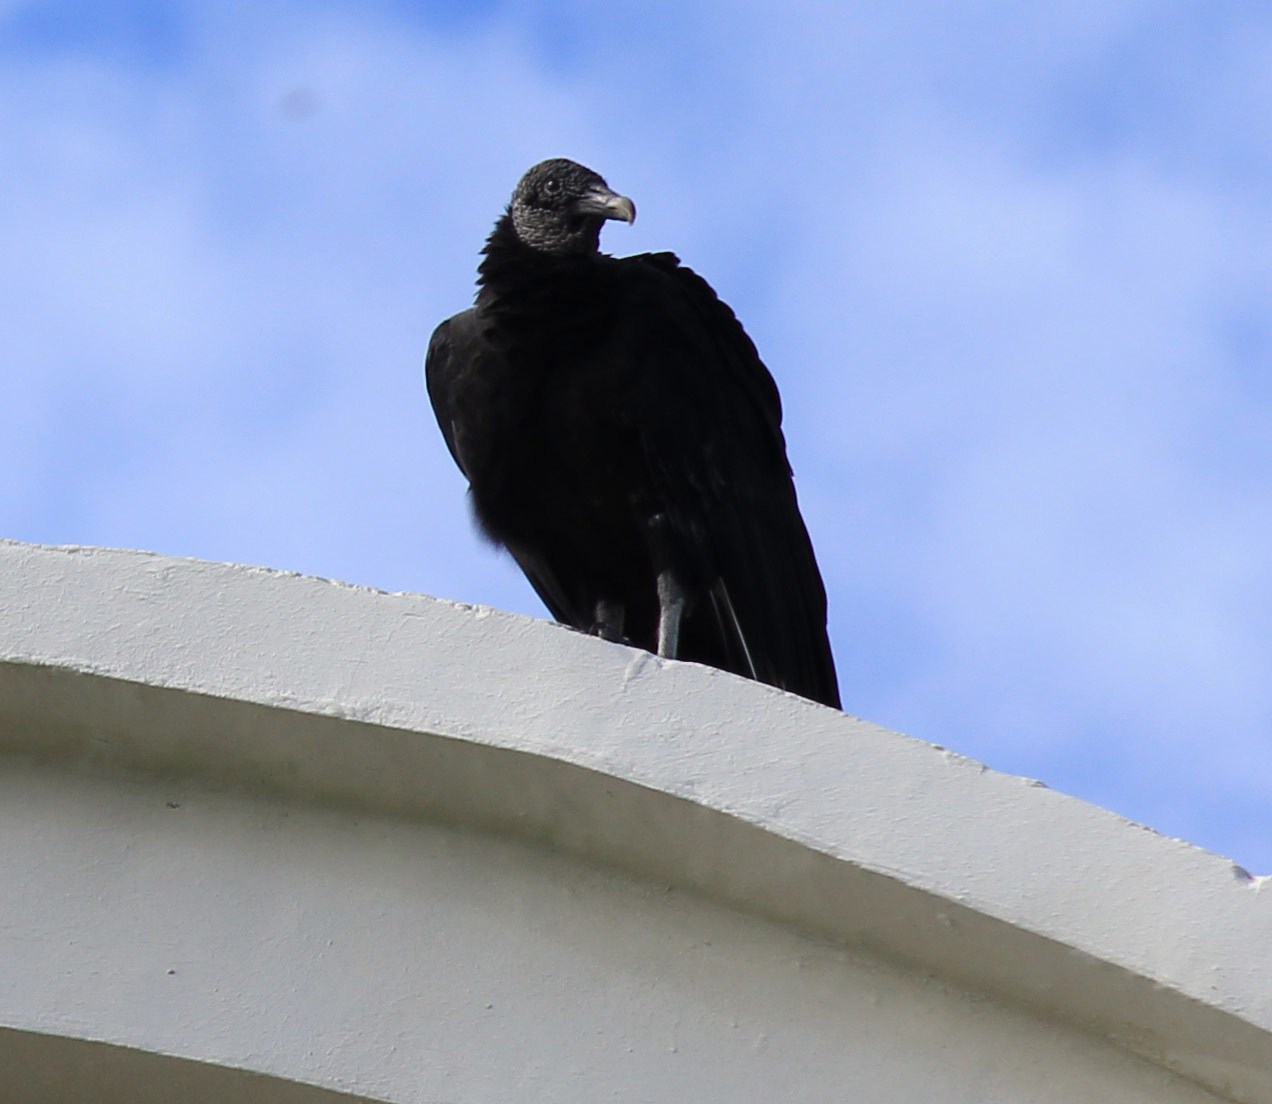 Black vultures in Mexico